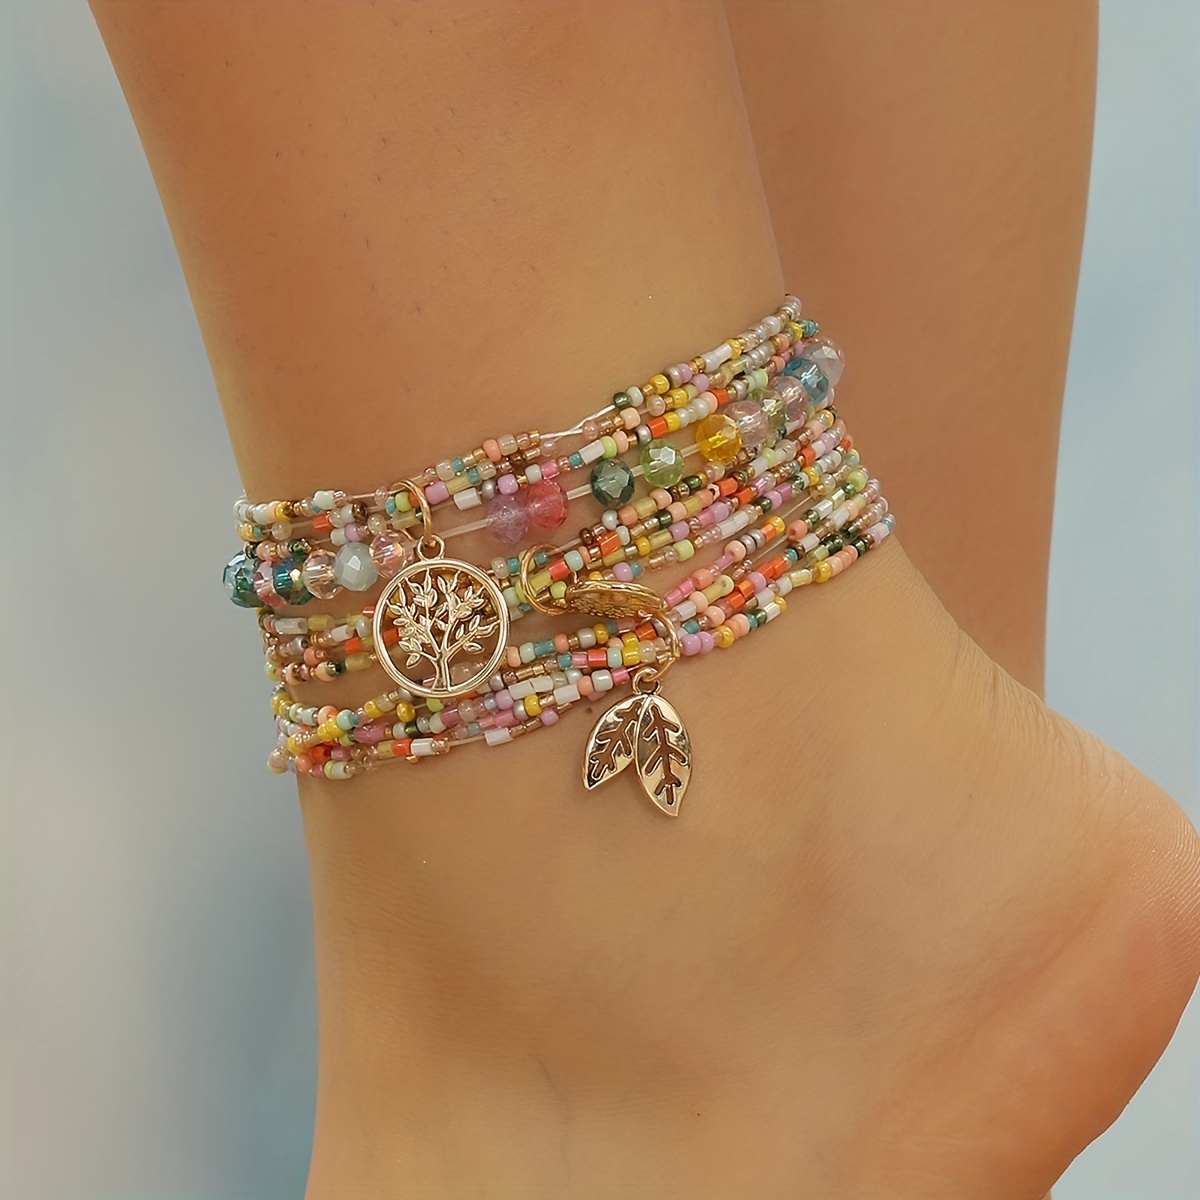 

13pcs Leaf Etc Pendant Beaded Anklet With Colorful Mini Rice Beads Boho Style Ankle Bracelet For Women